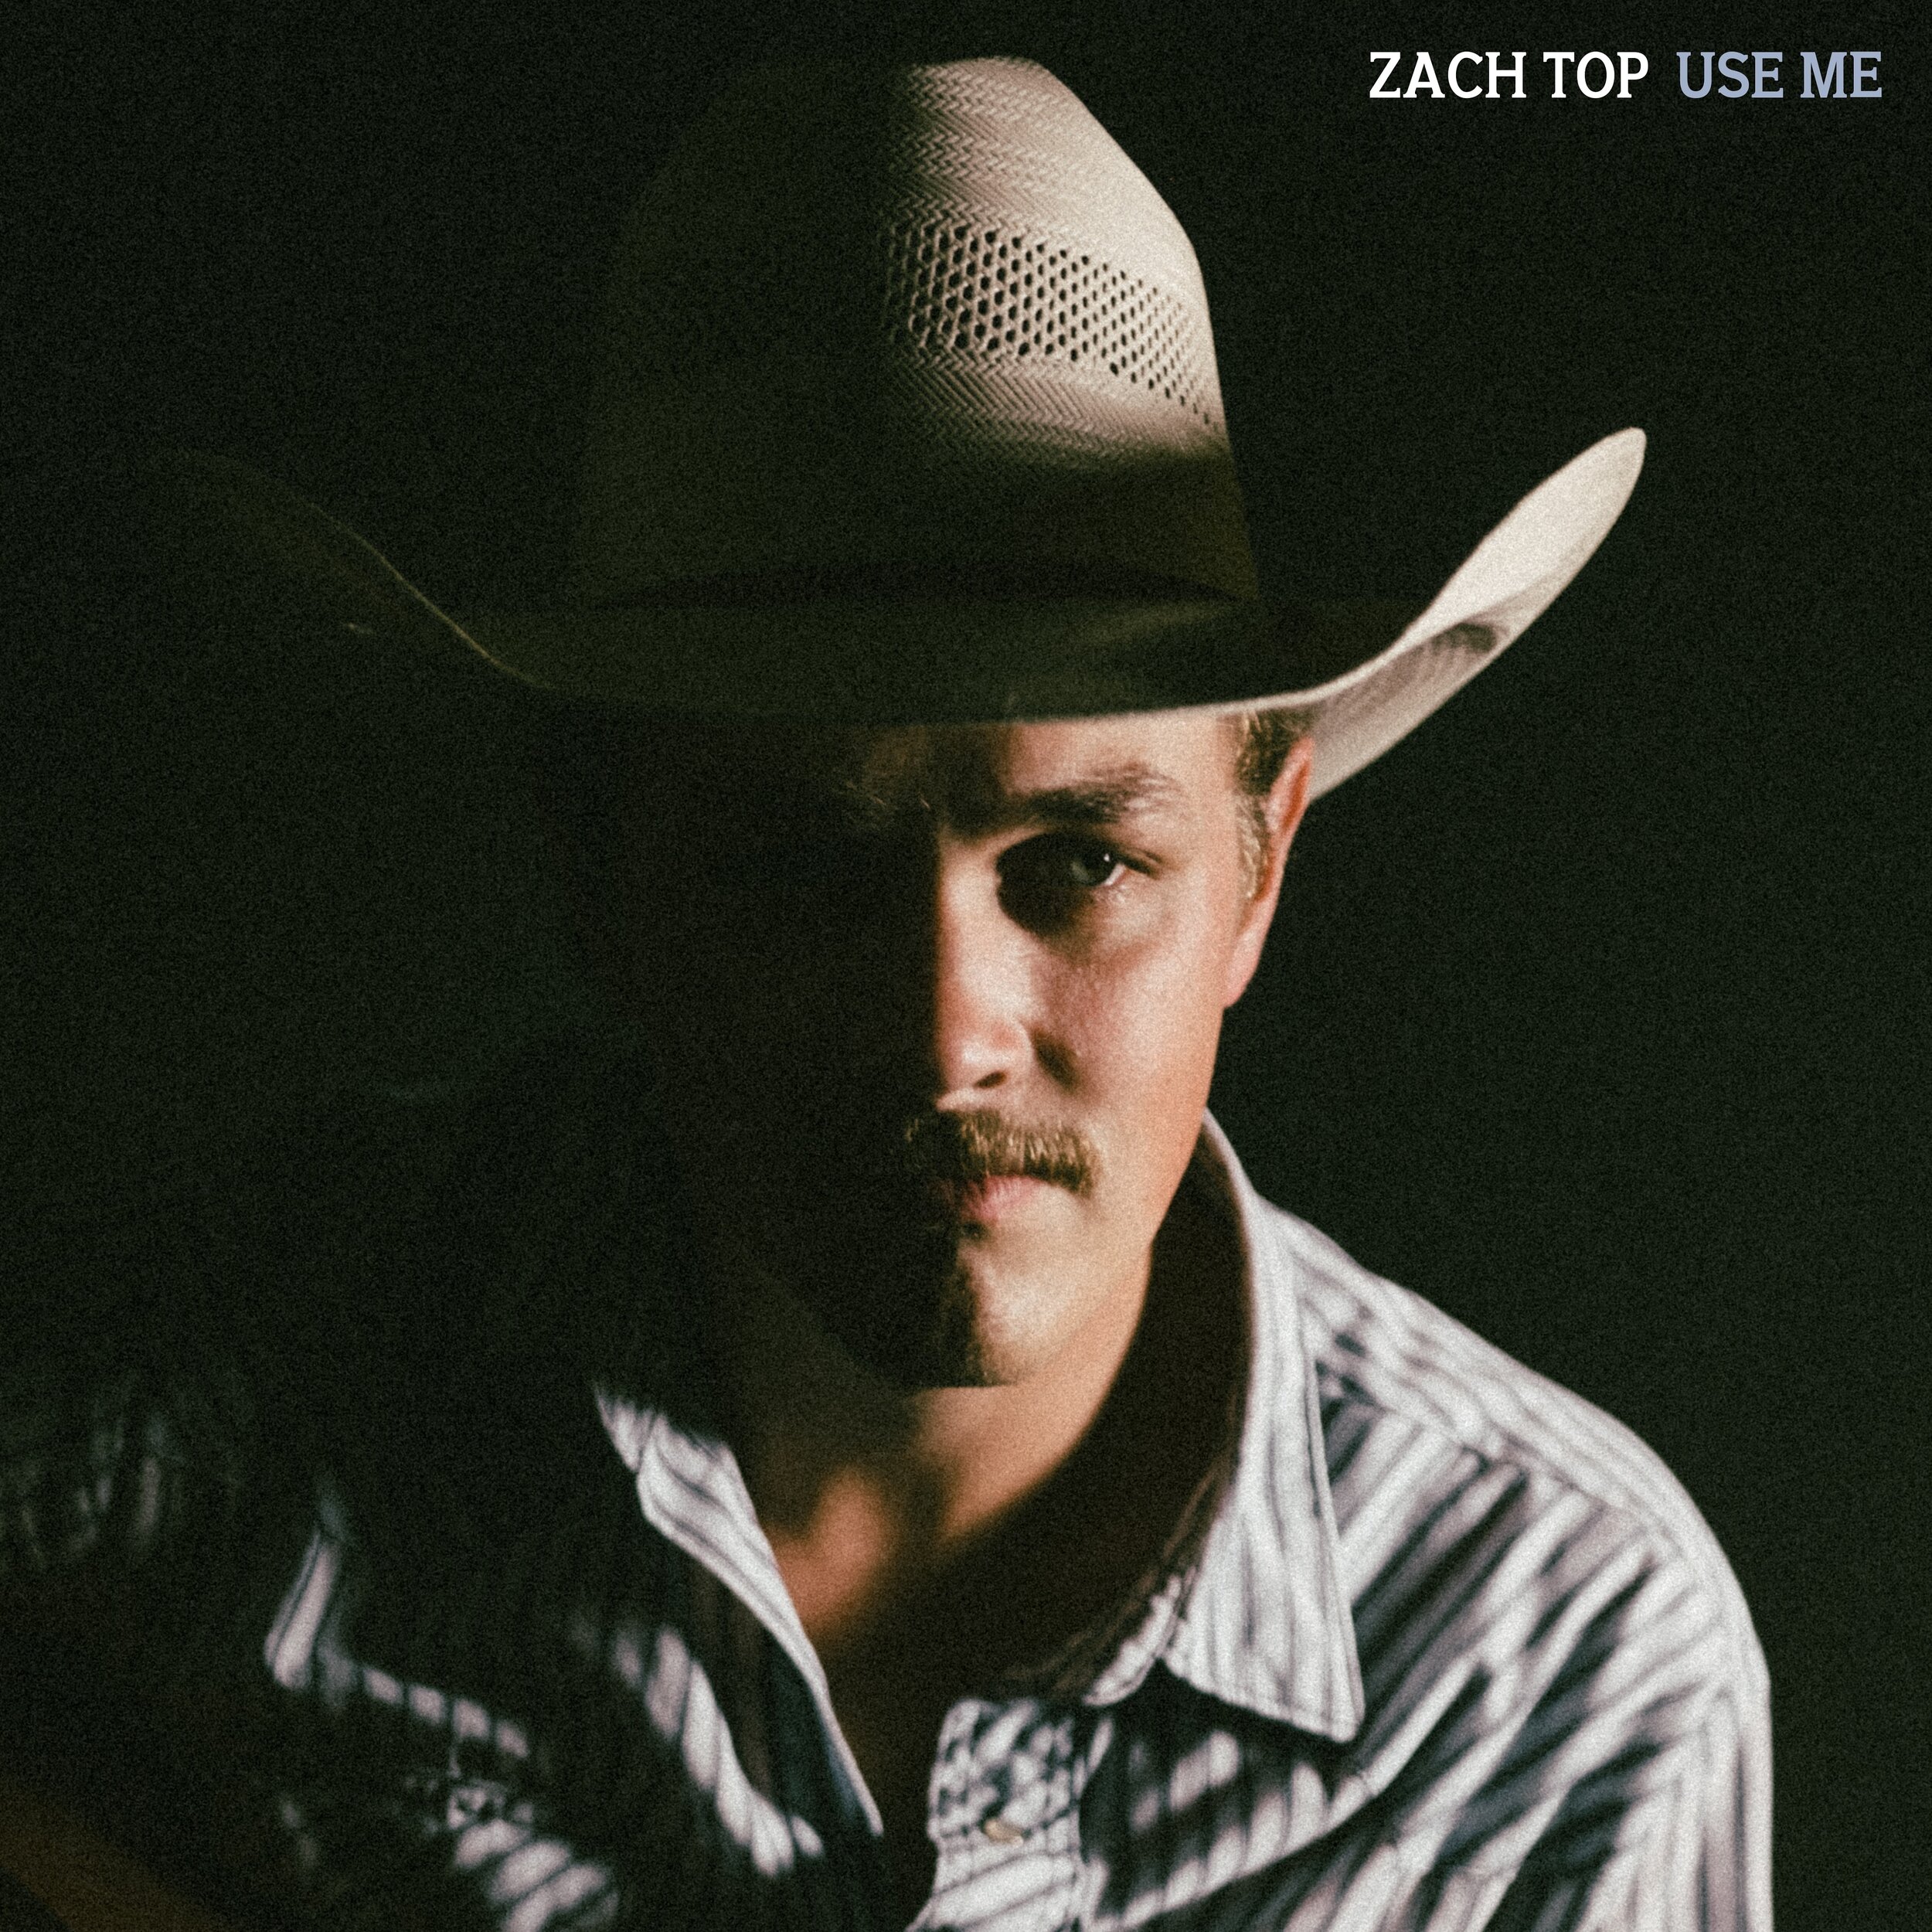 Zach Top &ldquo;Use Me&rdquo; is out now 🔥🍻🤠

-photo &amp; cover by @citizenkanewayne